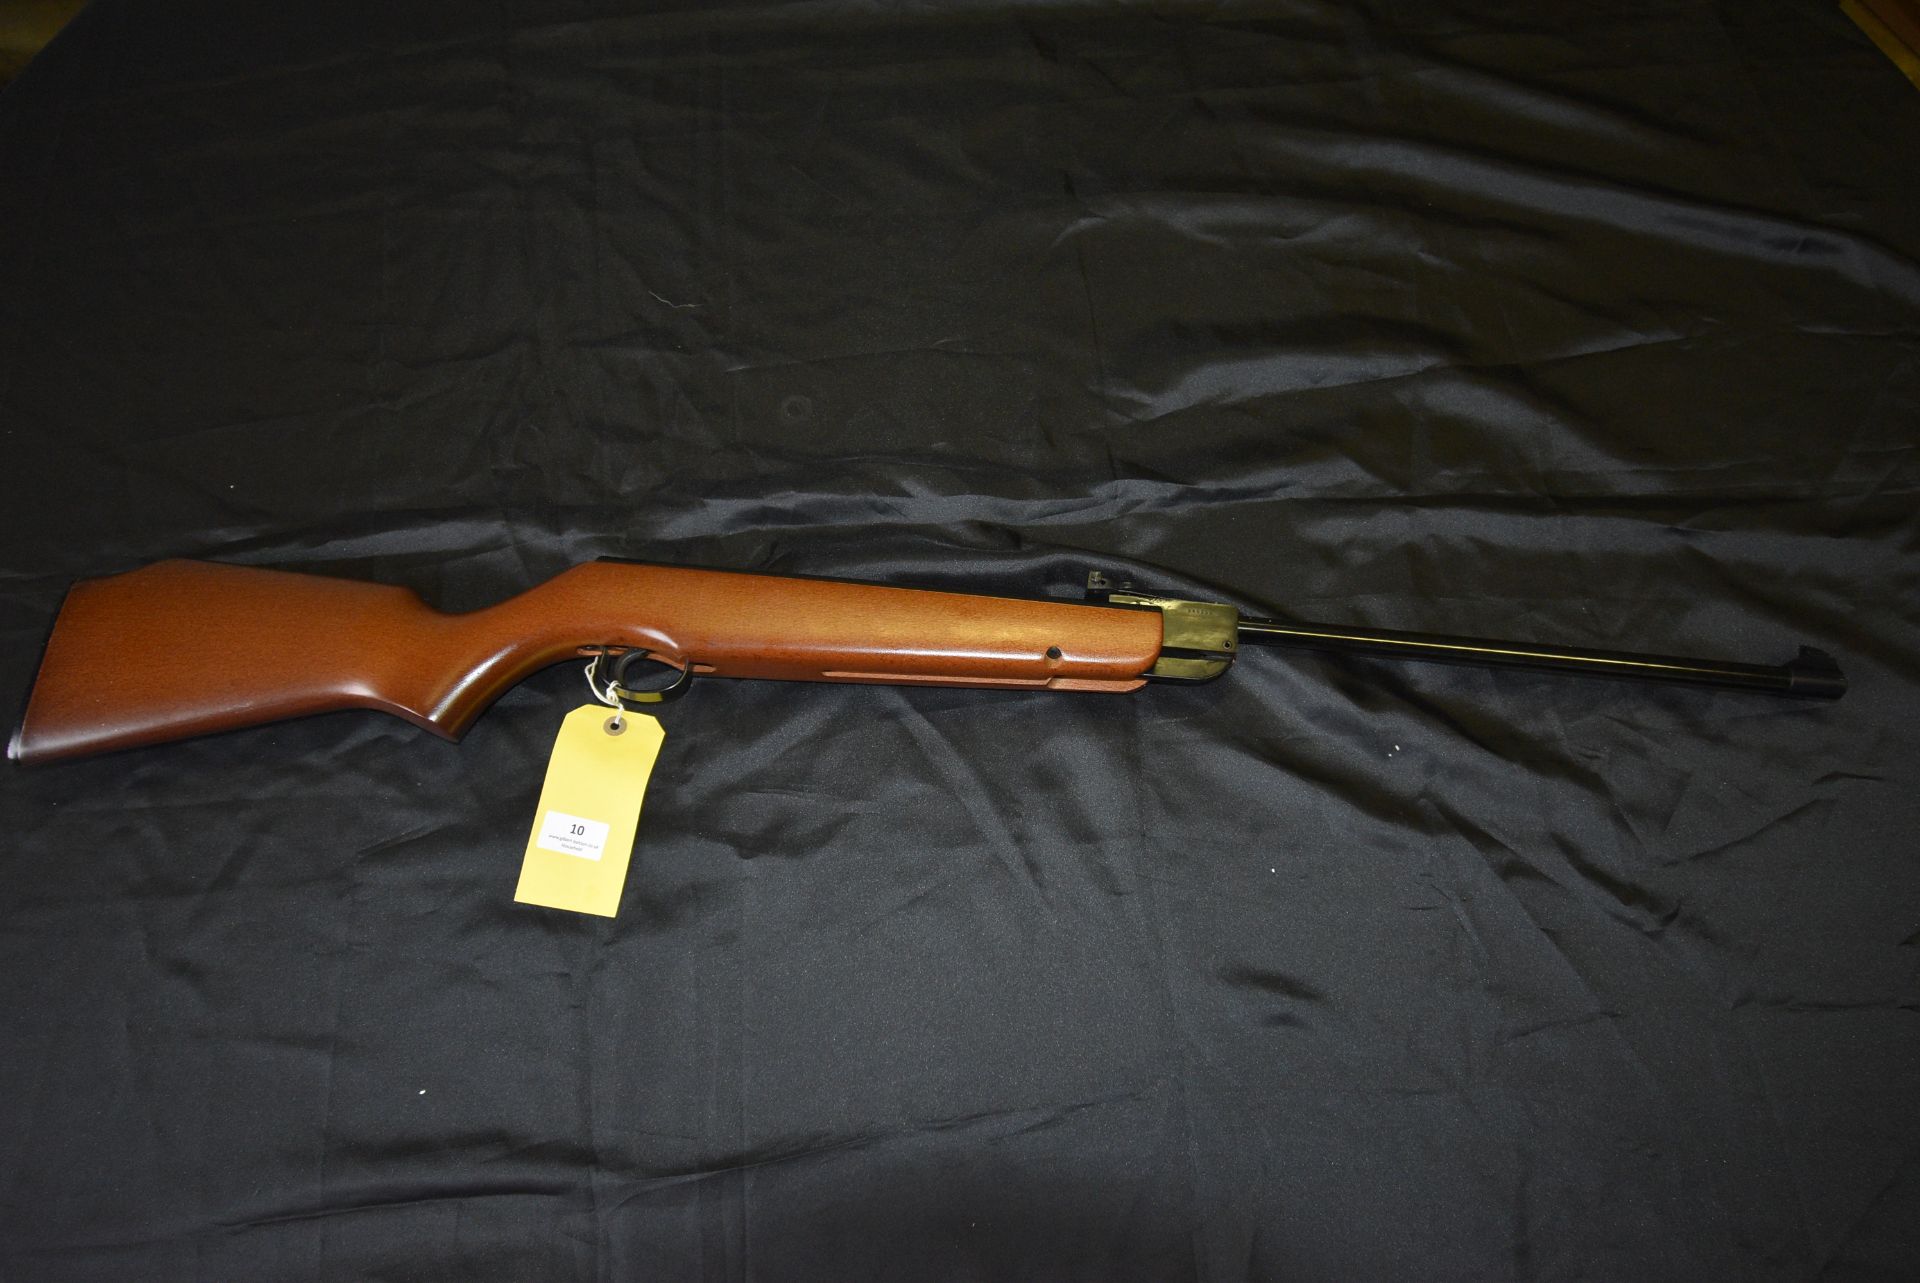 Webley & Scott Limited Excel 22 Air Rifle Serial No. 848339 - Image 3 of 4